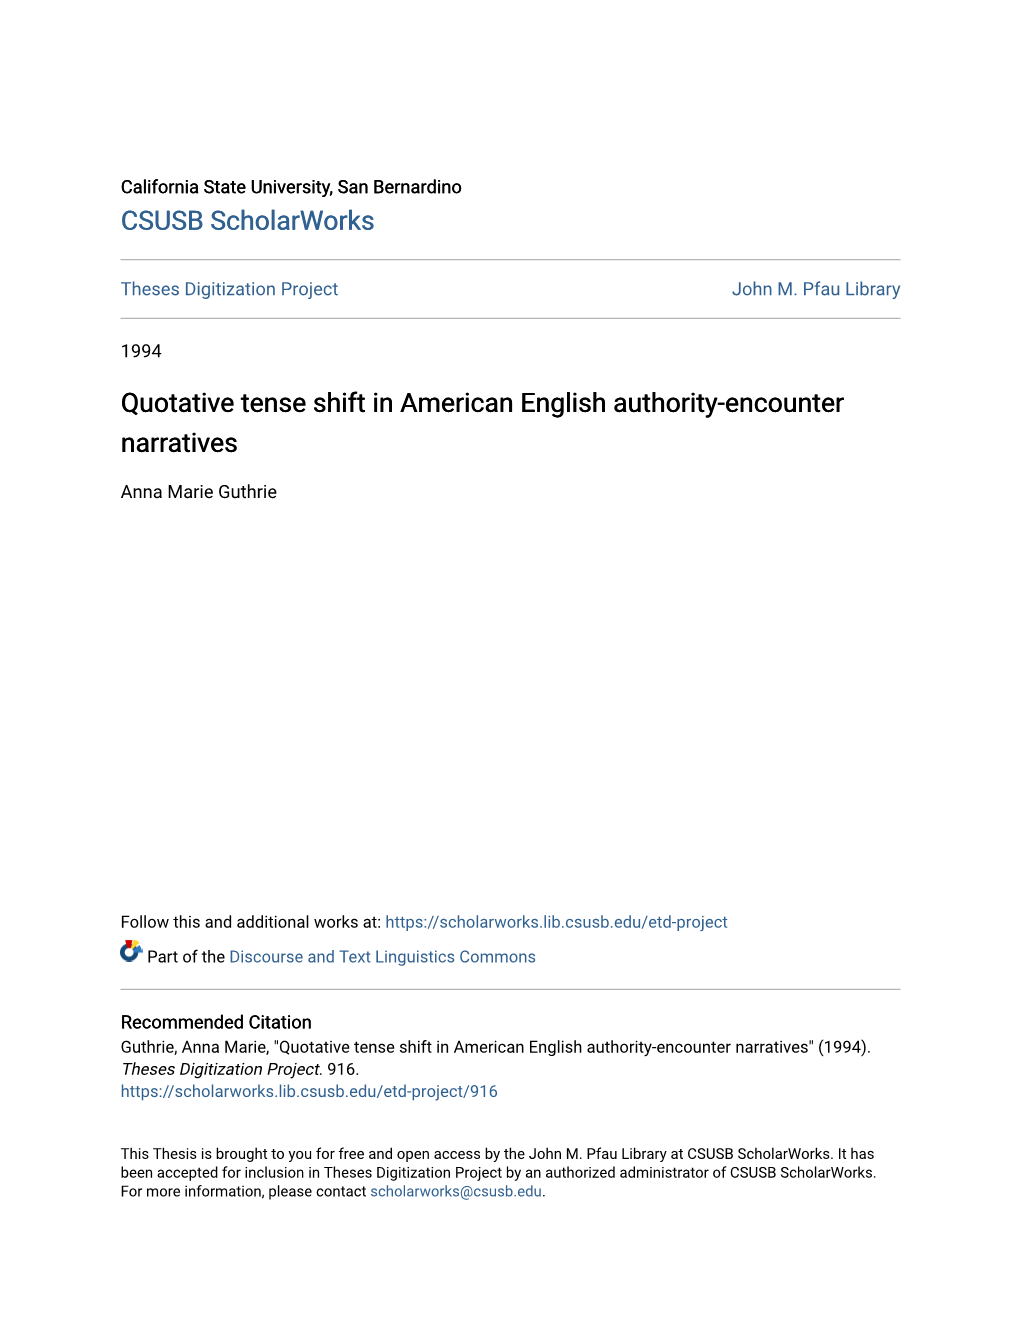 Quotative Tense Shift in American English Authority-Encounter Narratives